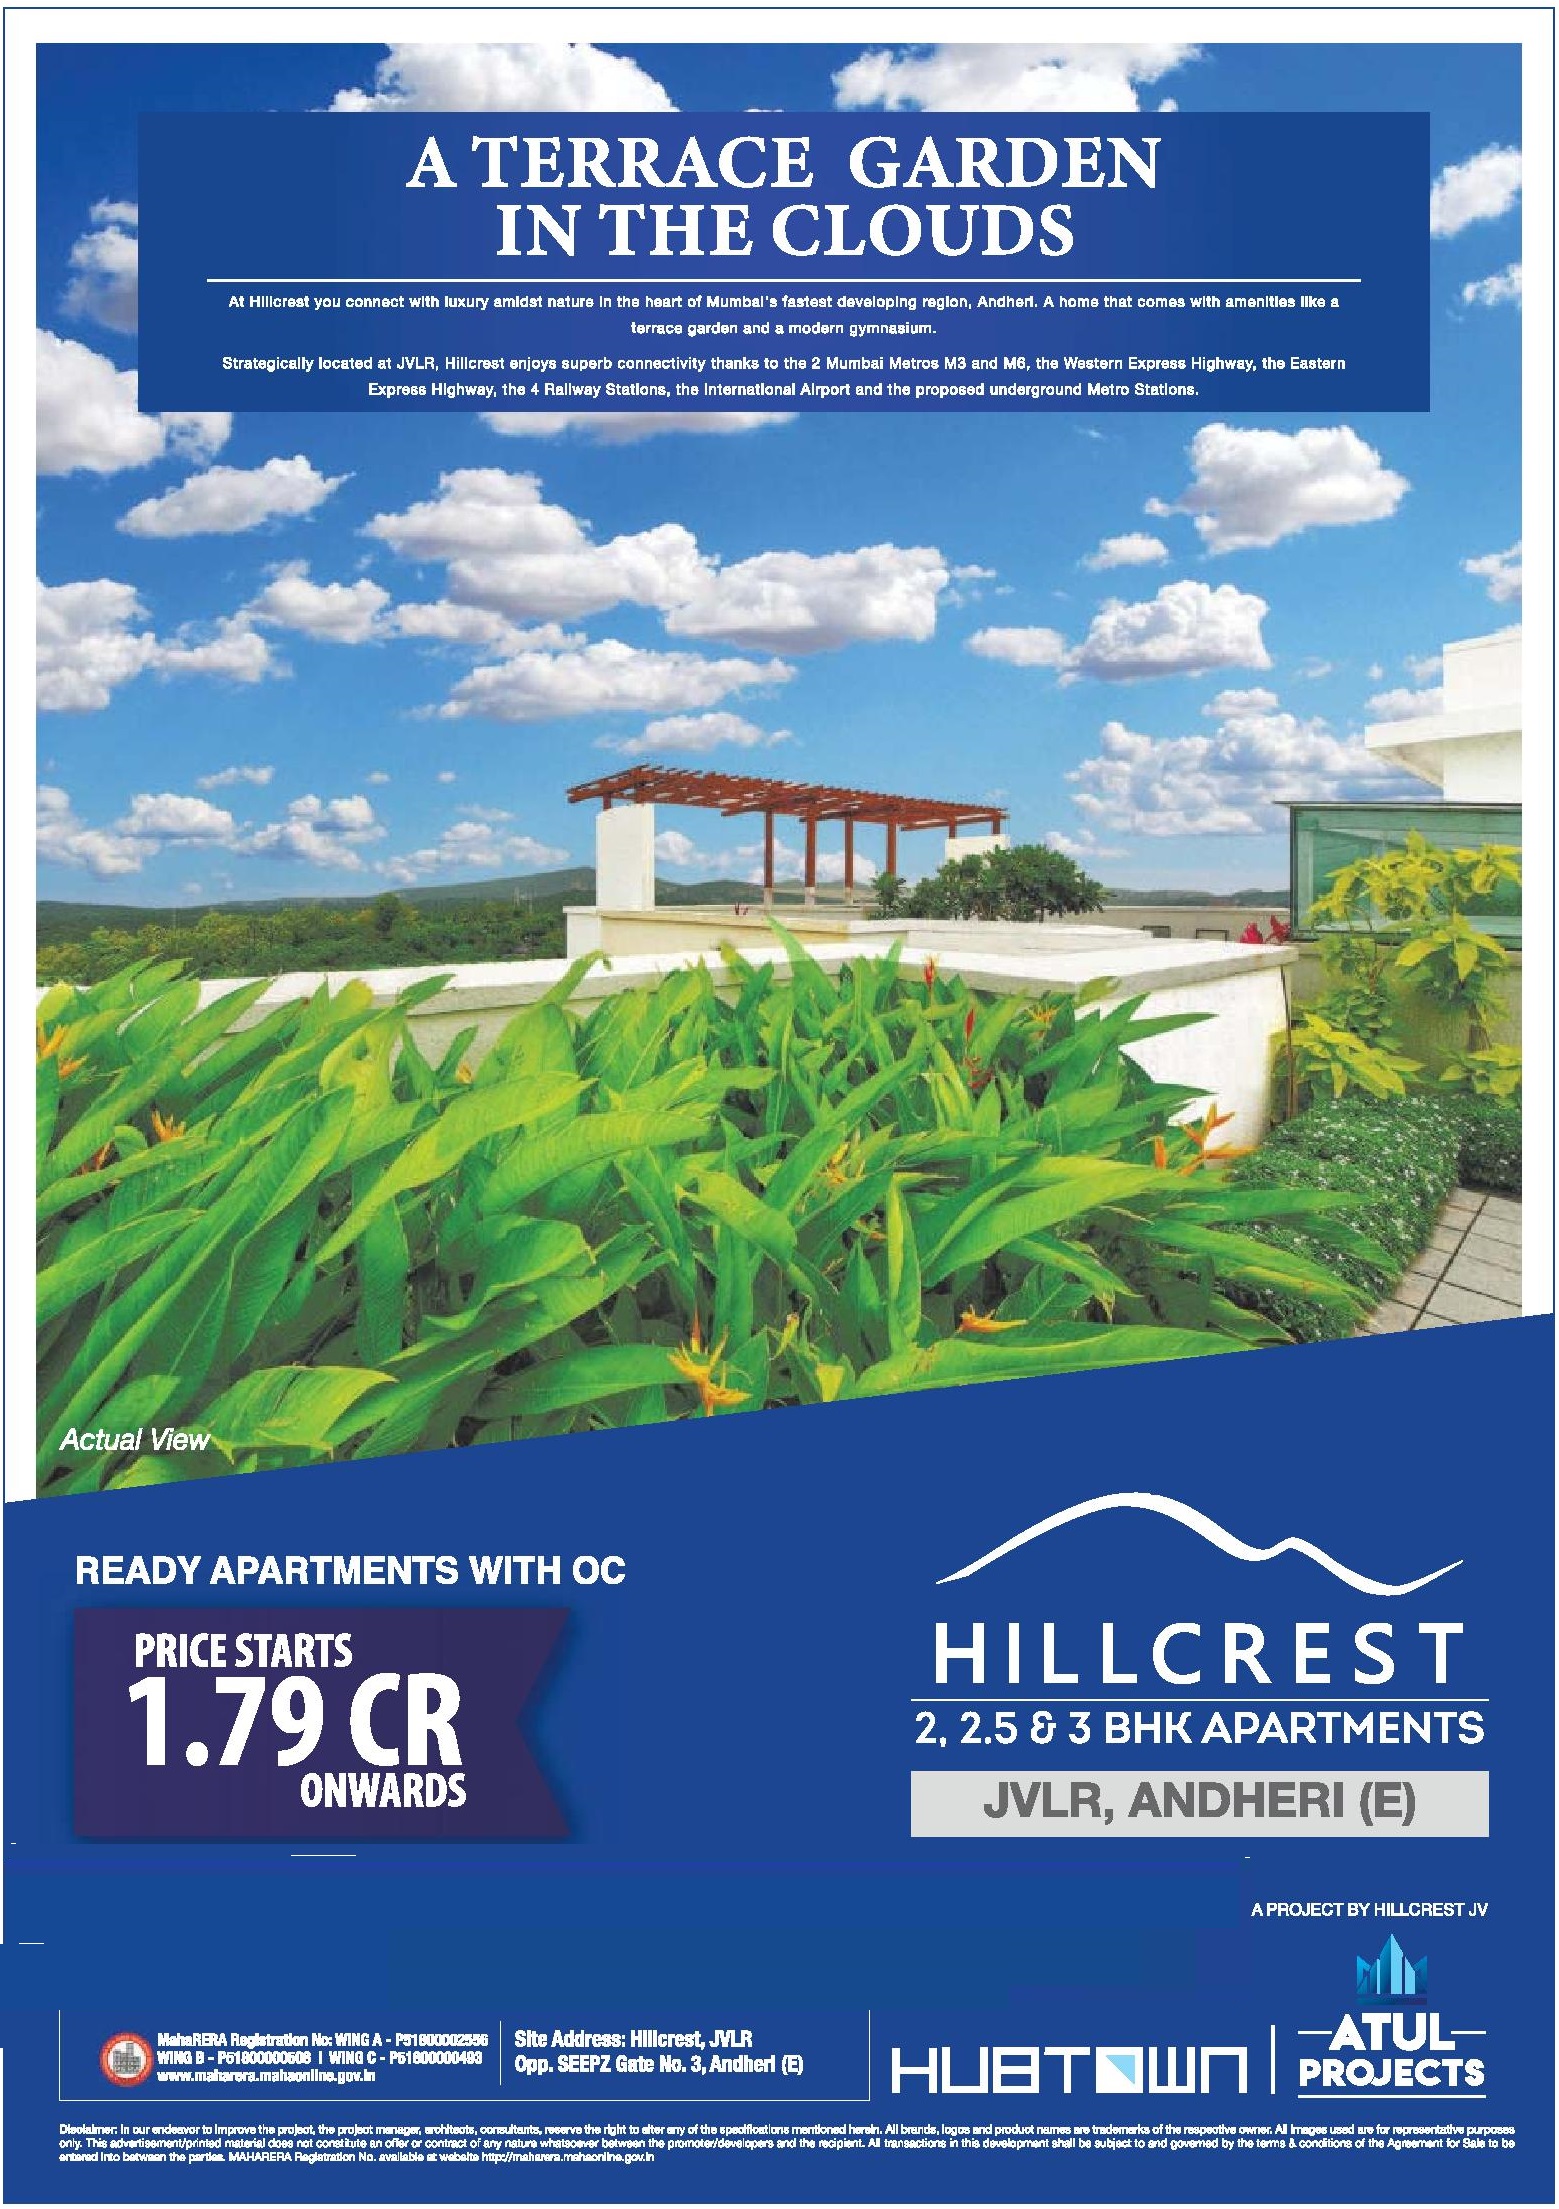 Book ready apartments with OC at Hubtown Hillcrest in Mumbai Update